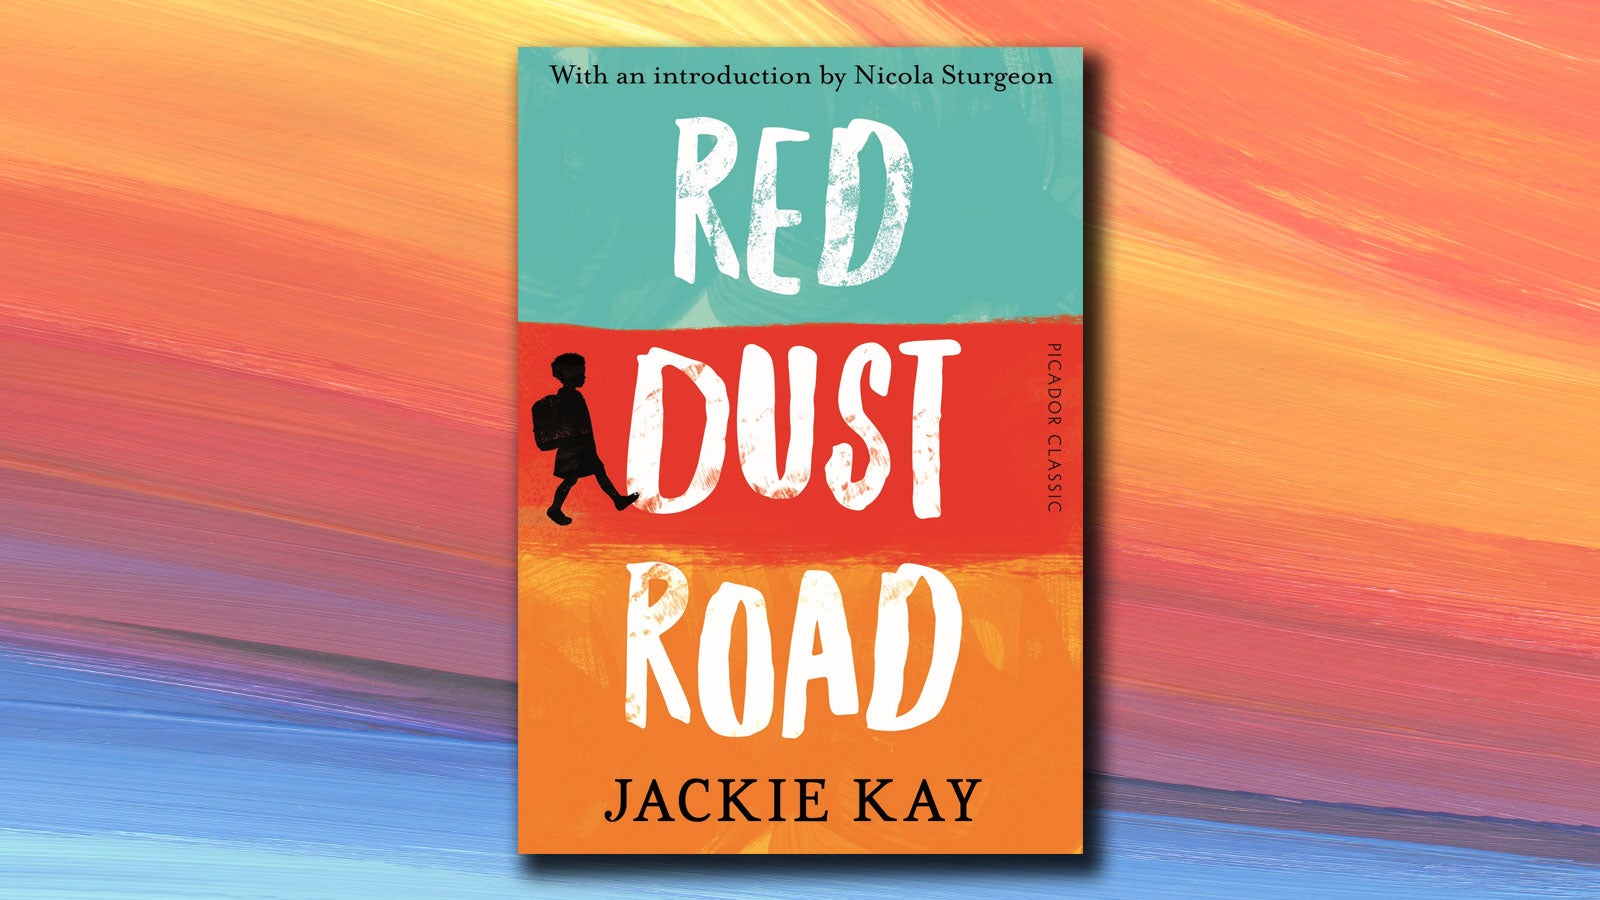 Red Dust Road jacket on a colourful background.